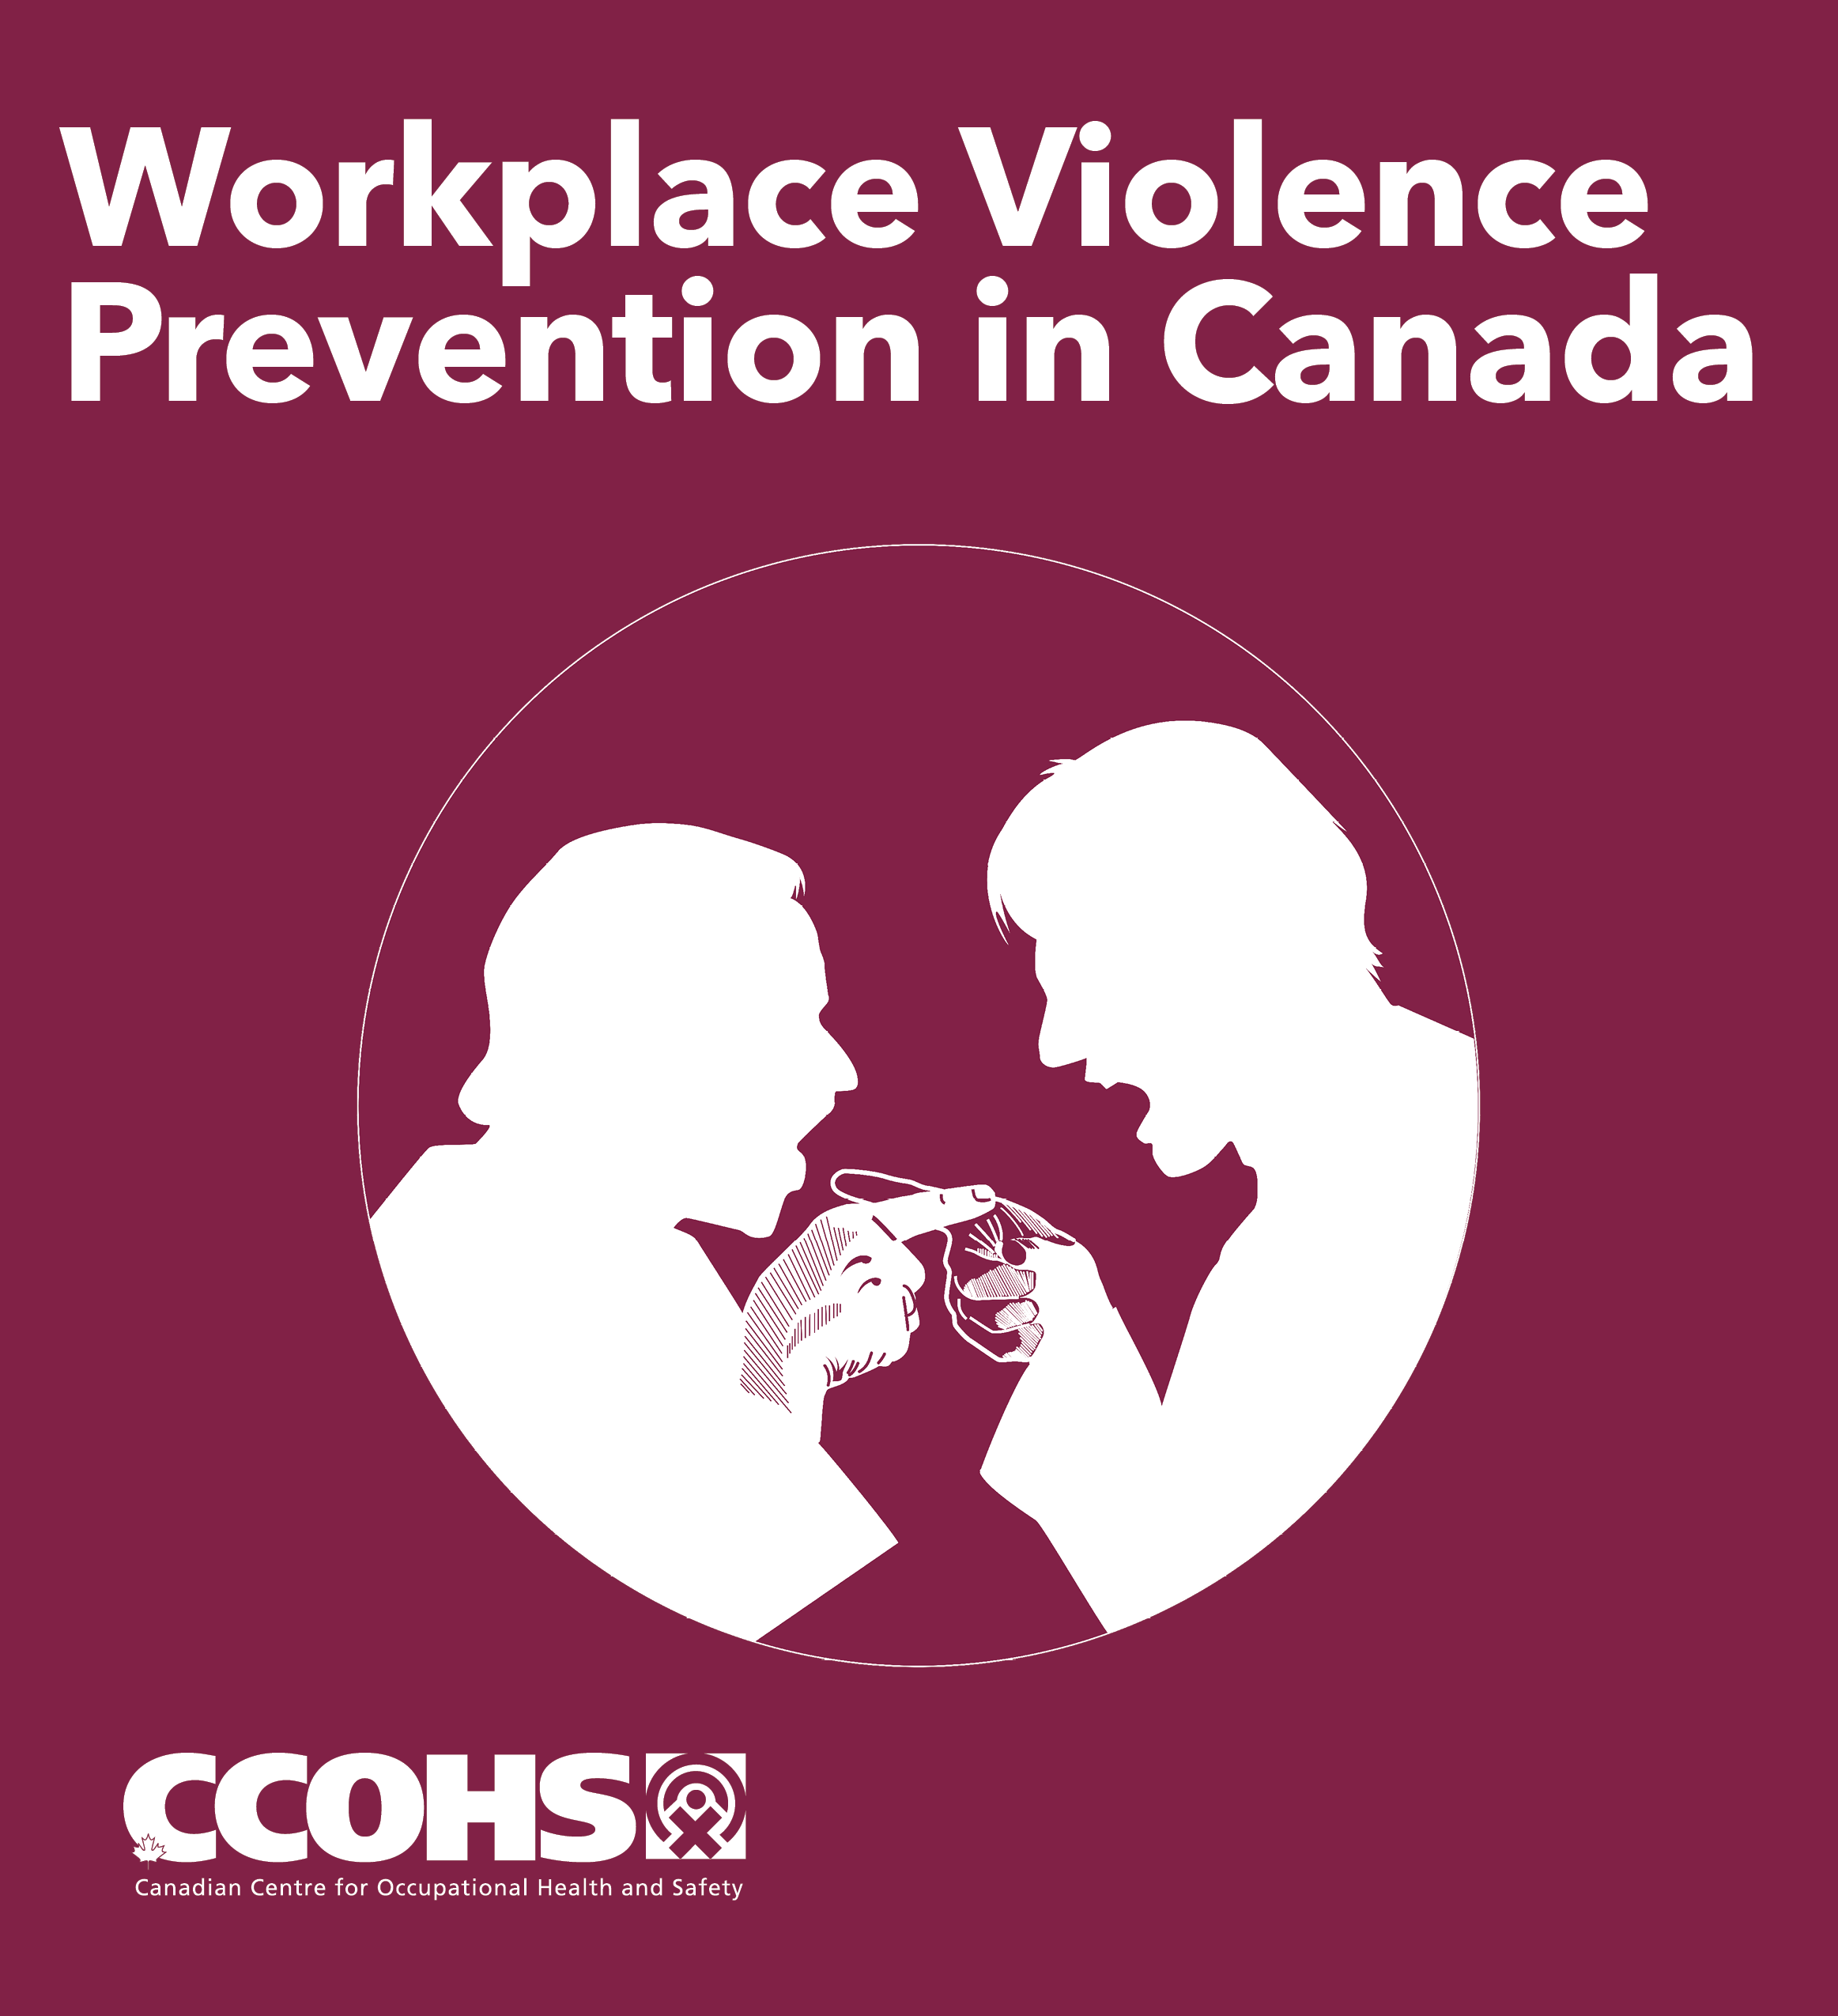 Workplace Violence Prevention in Canada poster's image